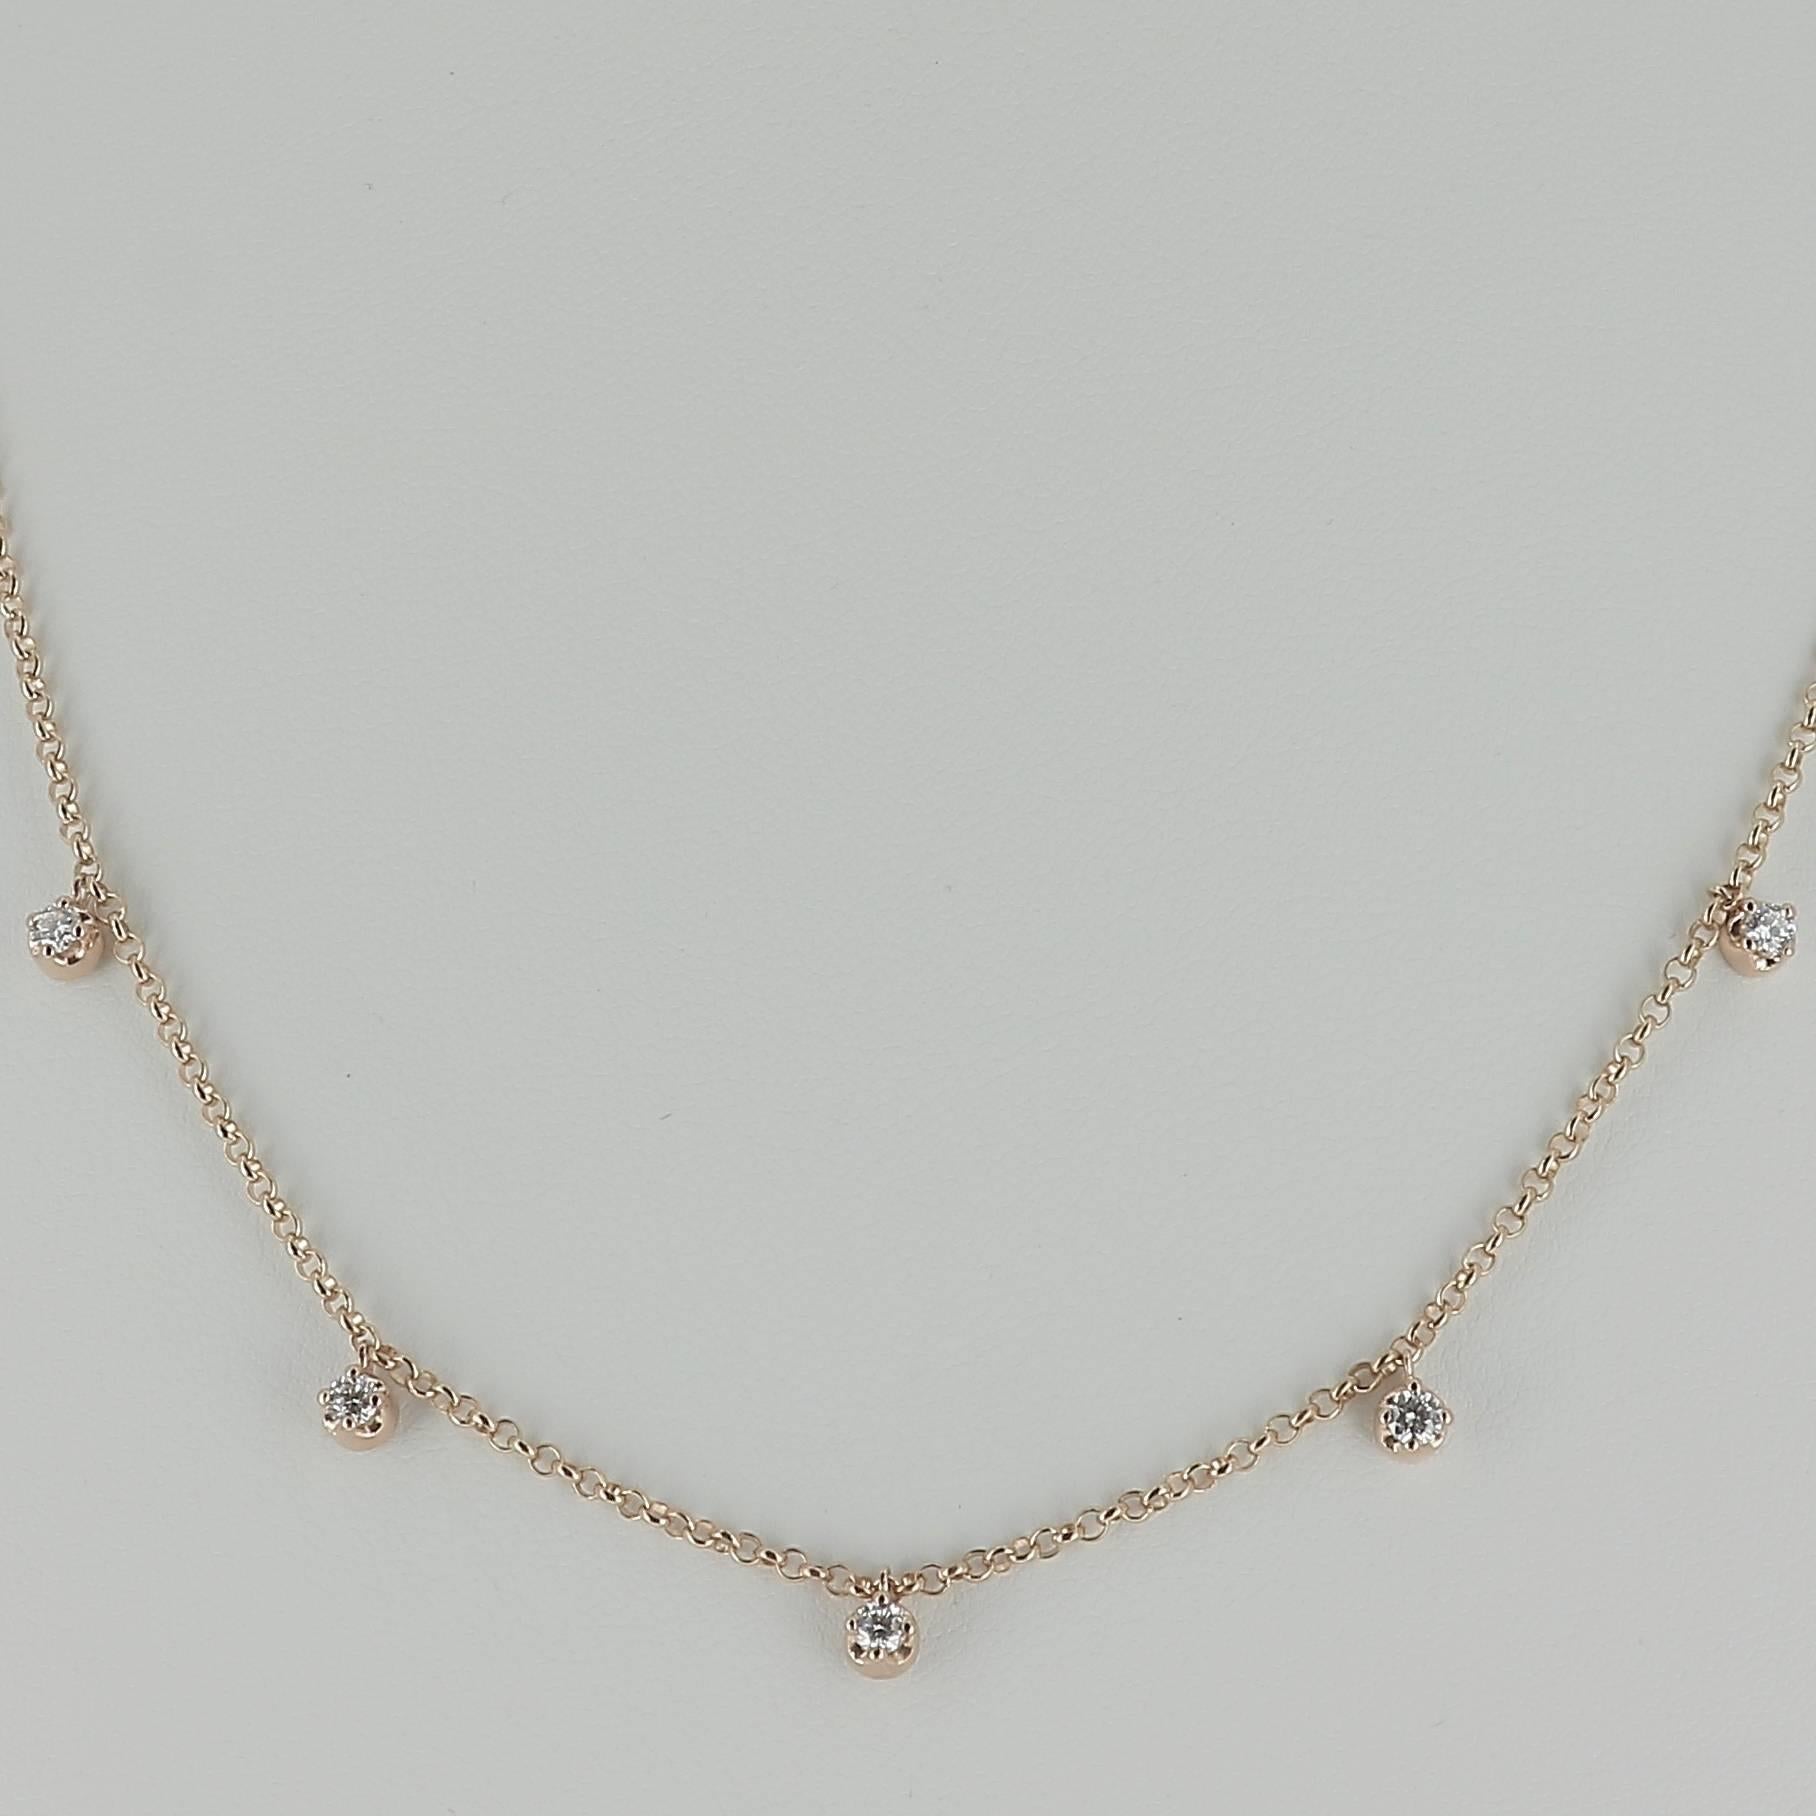 A beautiful choker necklace  set with 5 Round Diamonds weighing 0.36 carats.
The Diamonds are GVS qualities.
The Chocker Necklace is 18K White Gold
Available in 18K Rose Gold 18K Yellow Gold.

